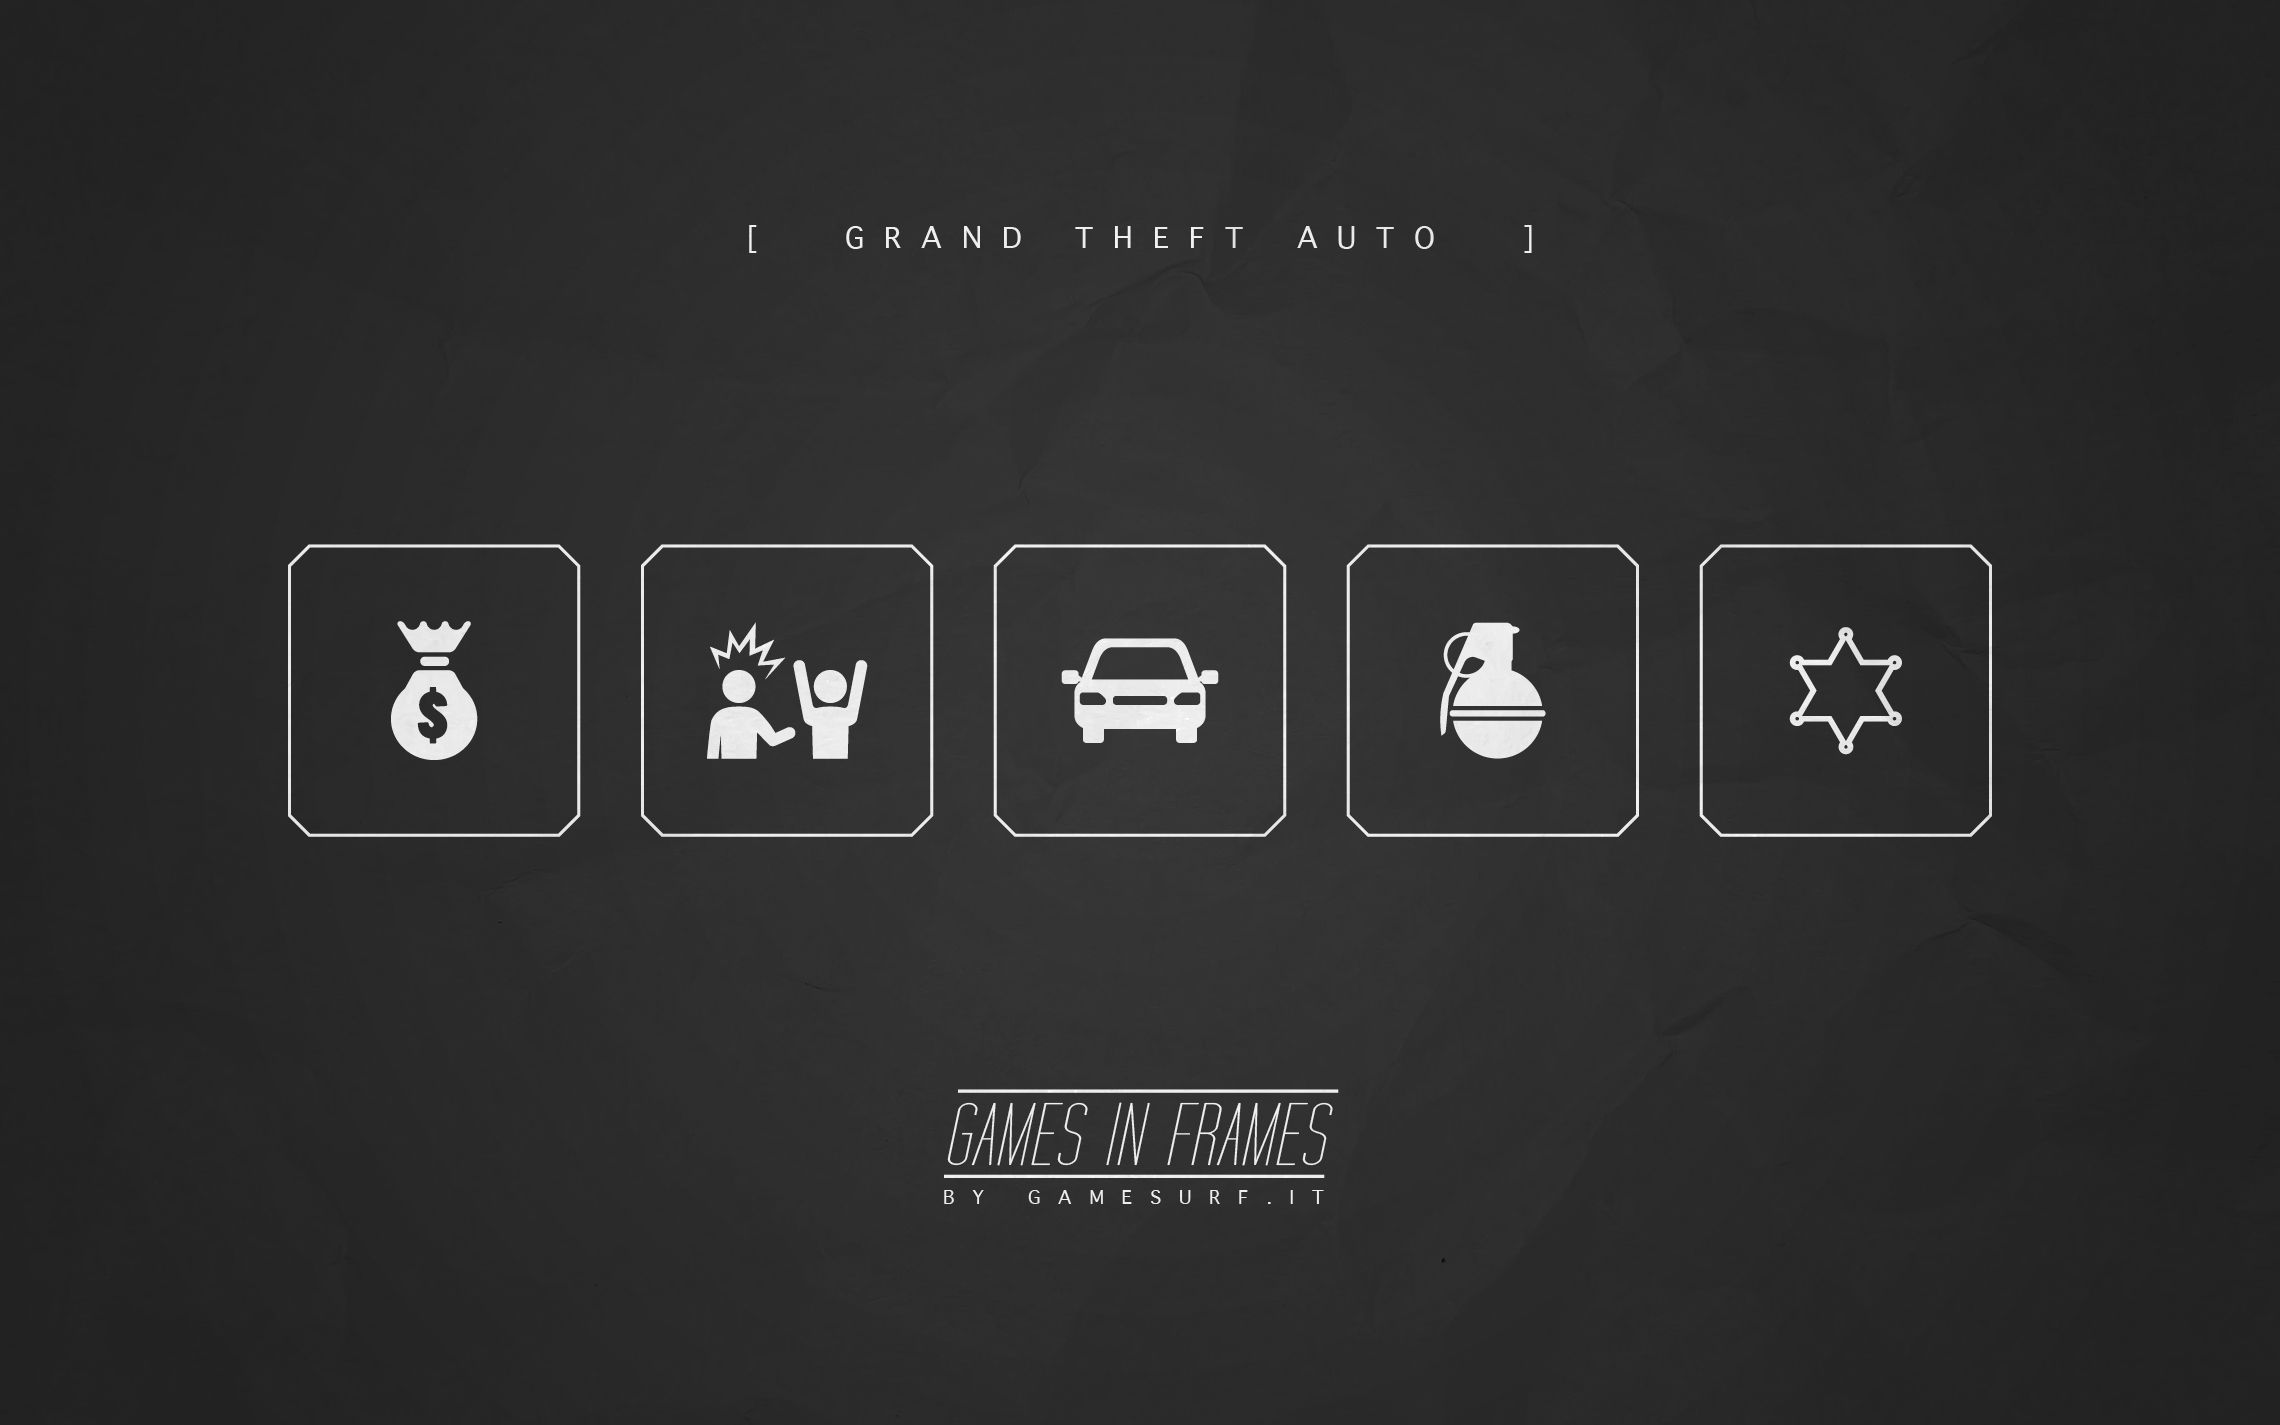 GAMES IN FRAMES n°001 - Grand Theft Auto